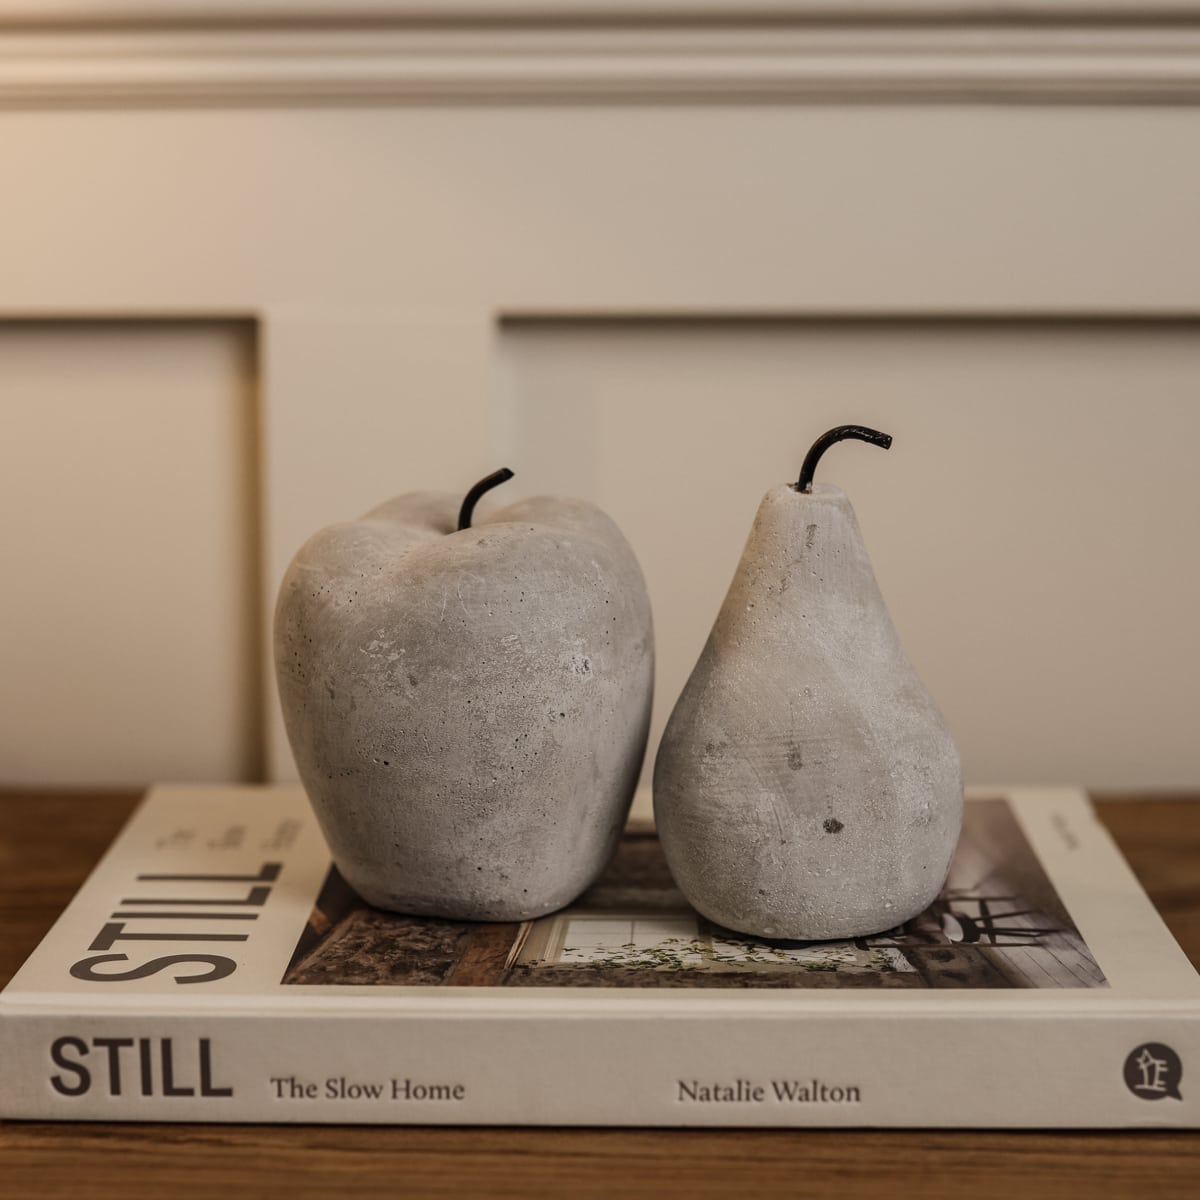 Cement grey washed apple and pear ornaments on white decorative book on wooden console.